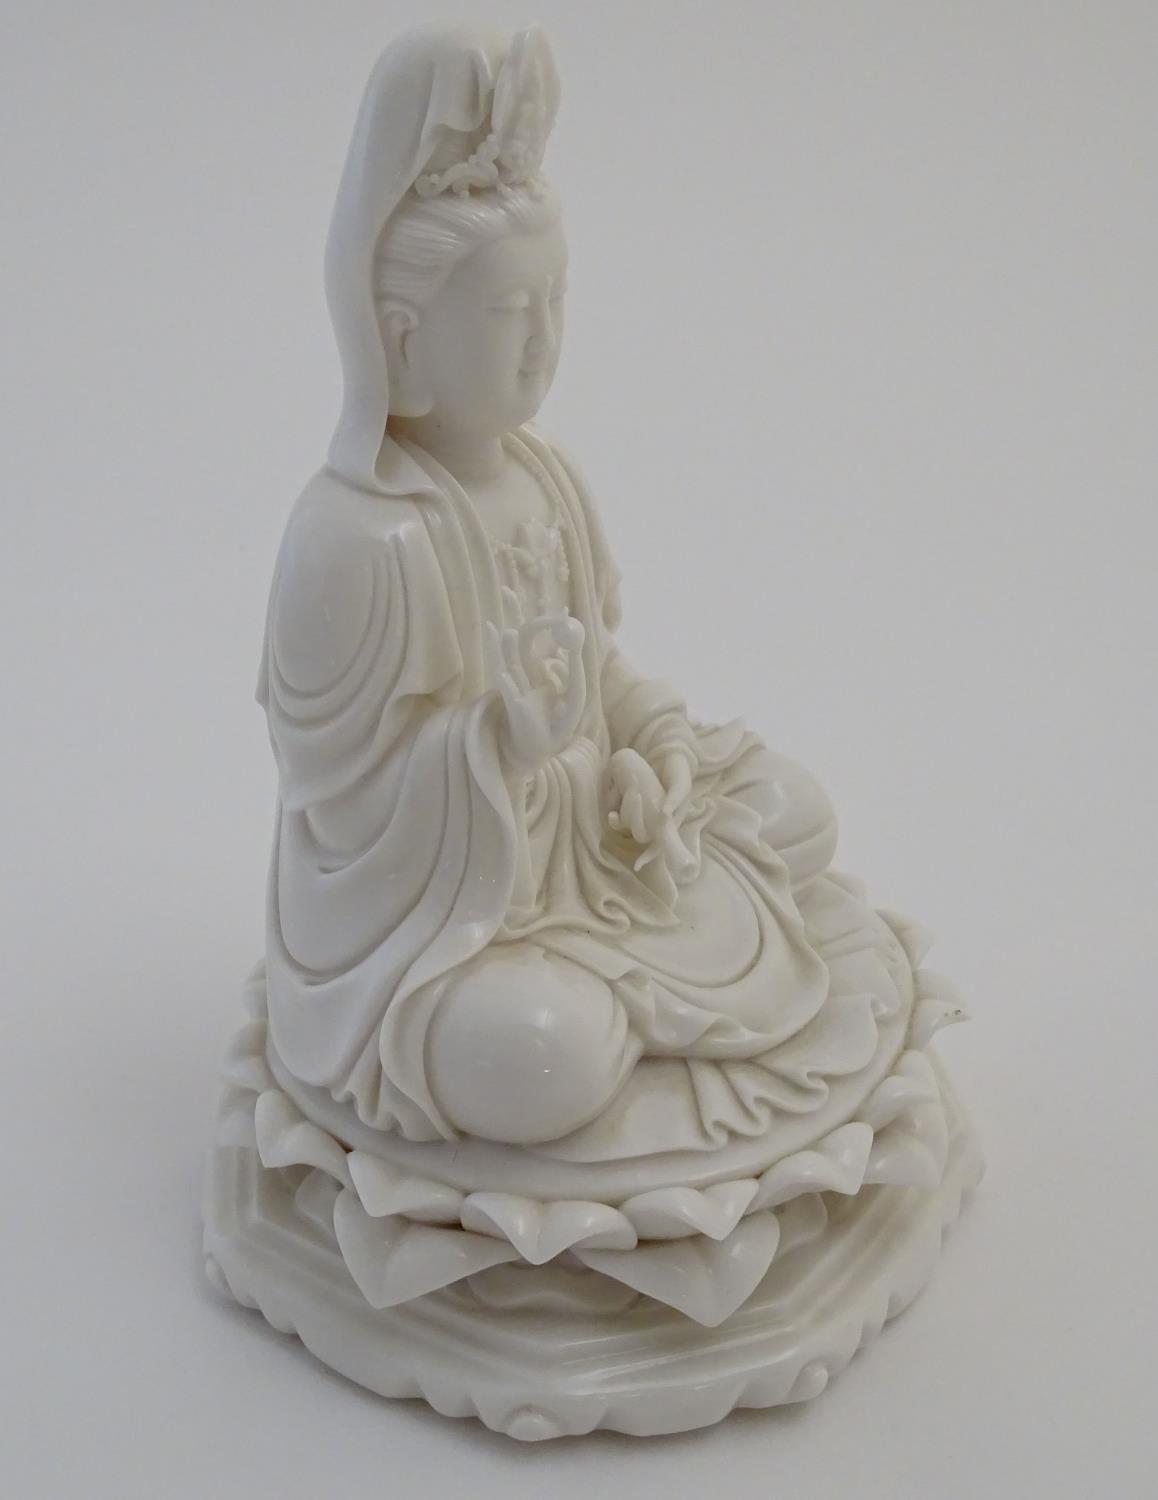 A Chinese blanc de chine figure depicting Guanyin seated on a lotus flower base. Approx. 7 1/2" high - Image 3 of 16